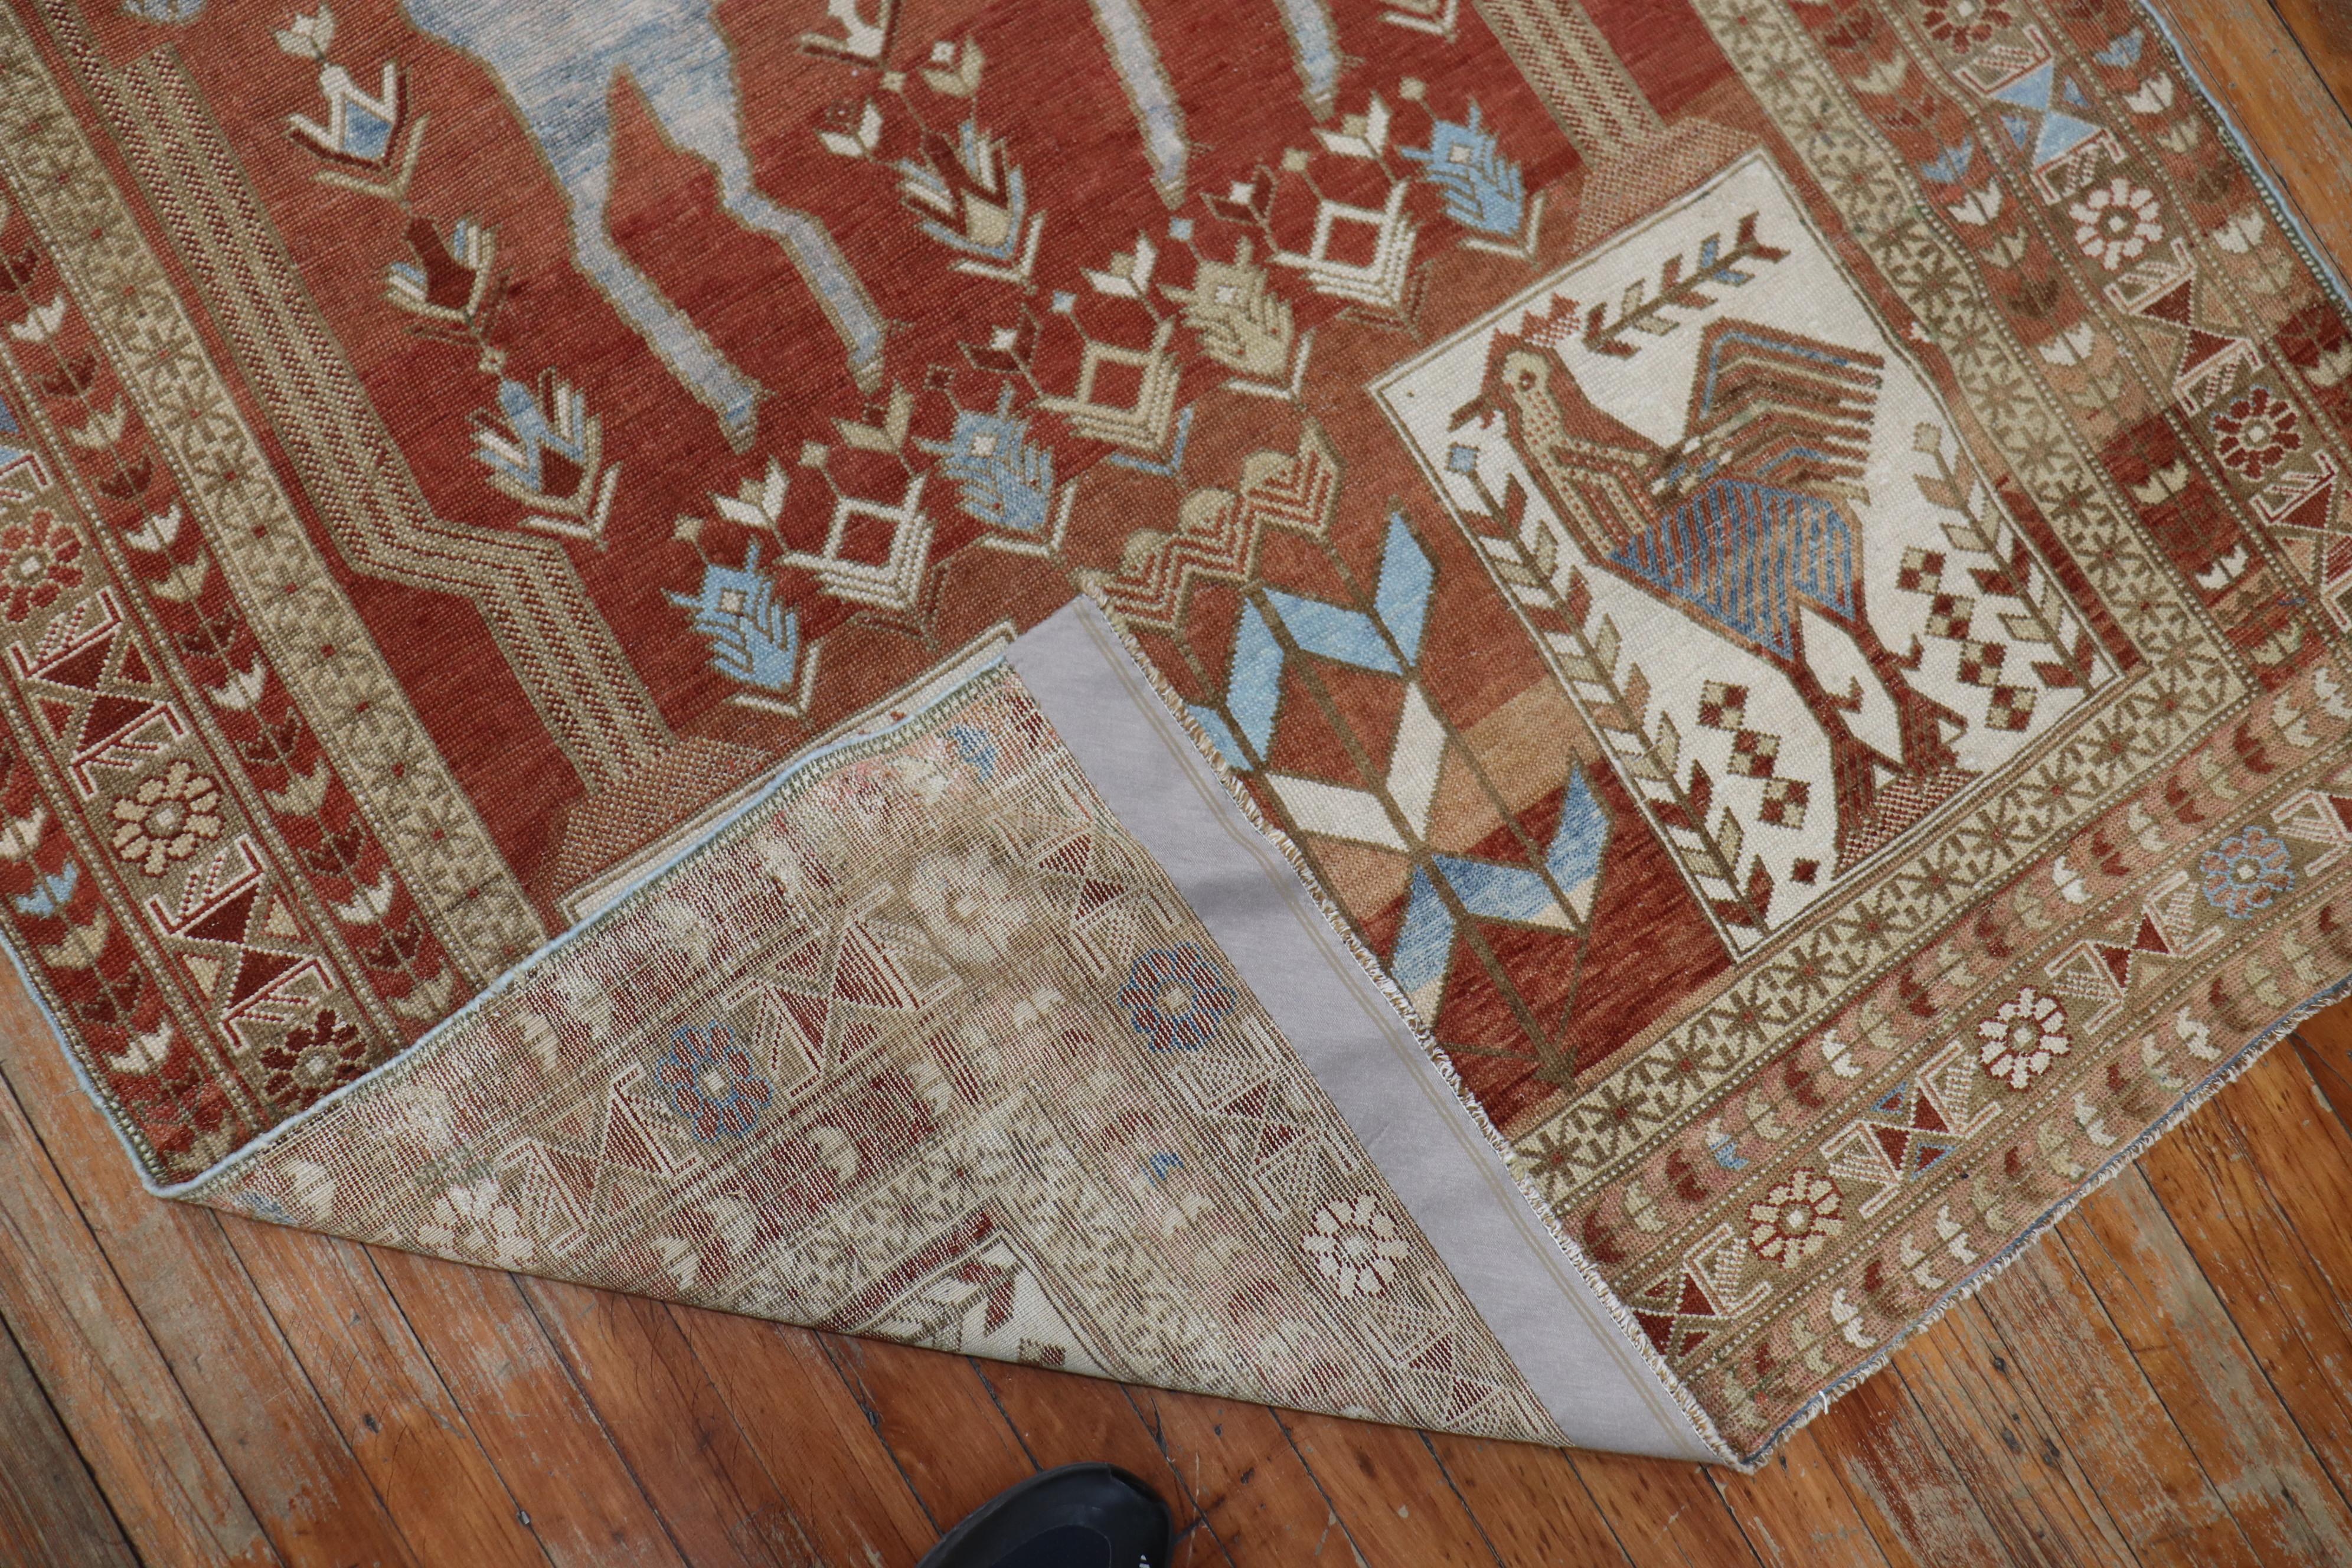 A fine rust colored Caucasian rug depicting a large light blue colored horse and 4 roosters dated 1948.

Measures: 4'3